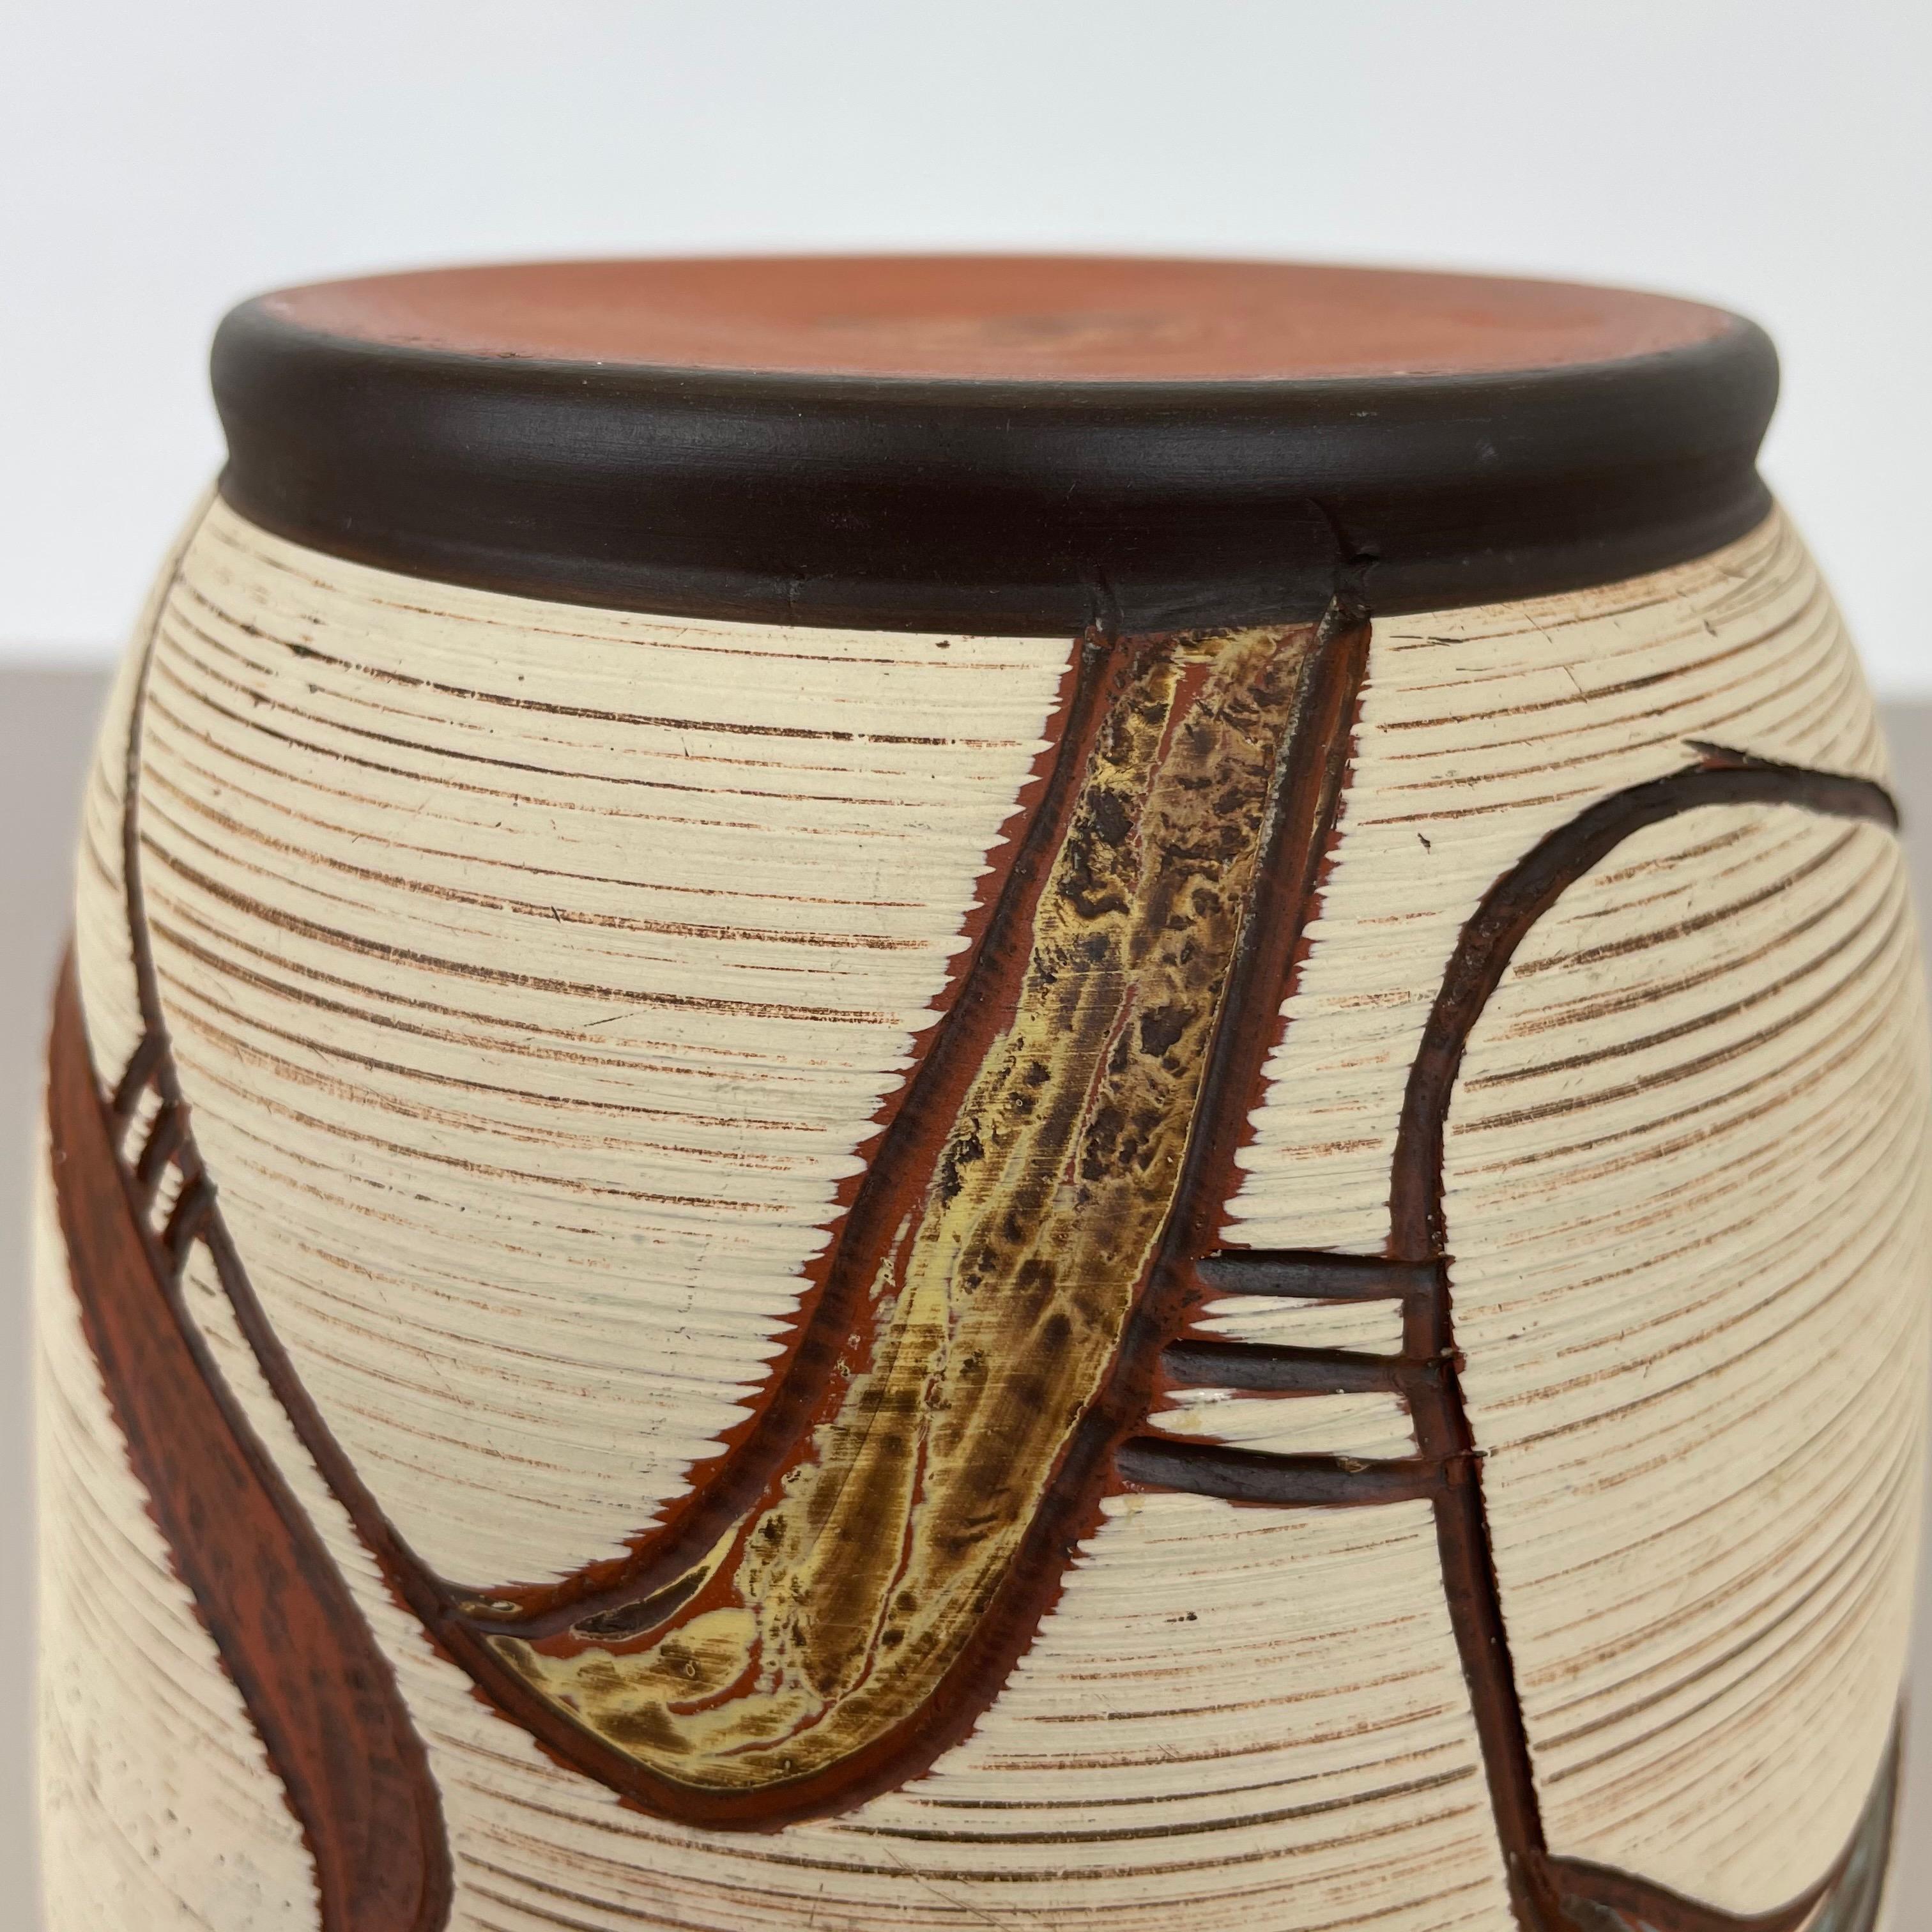 Colorful Abstract Ceramic Pottery Vase by Sawa Franz Schwaderlapp, Germany 1950s For Sale 8